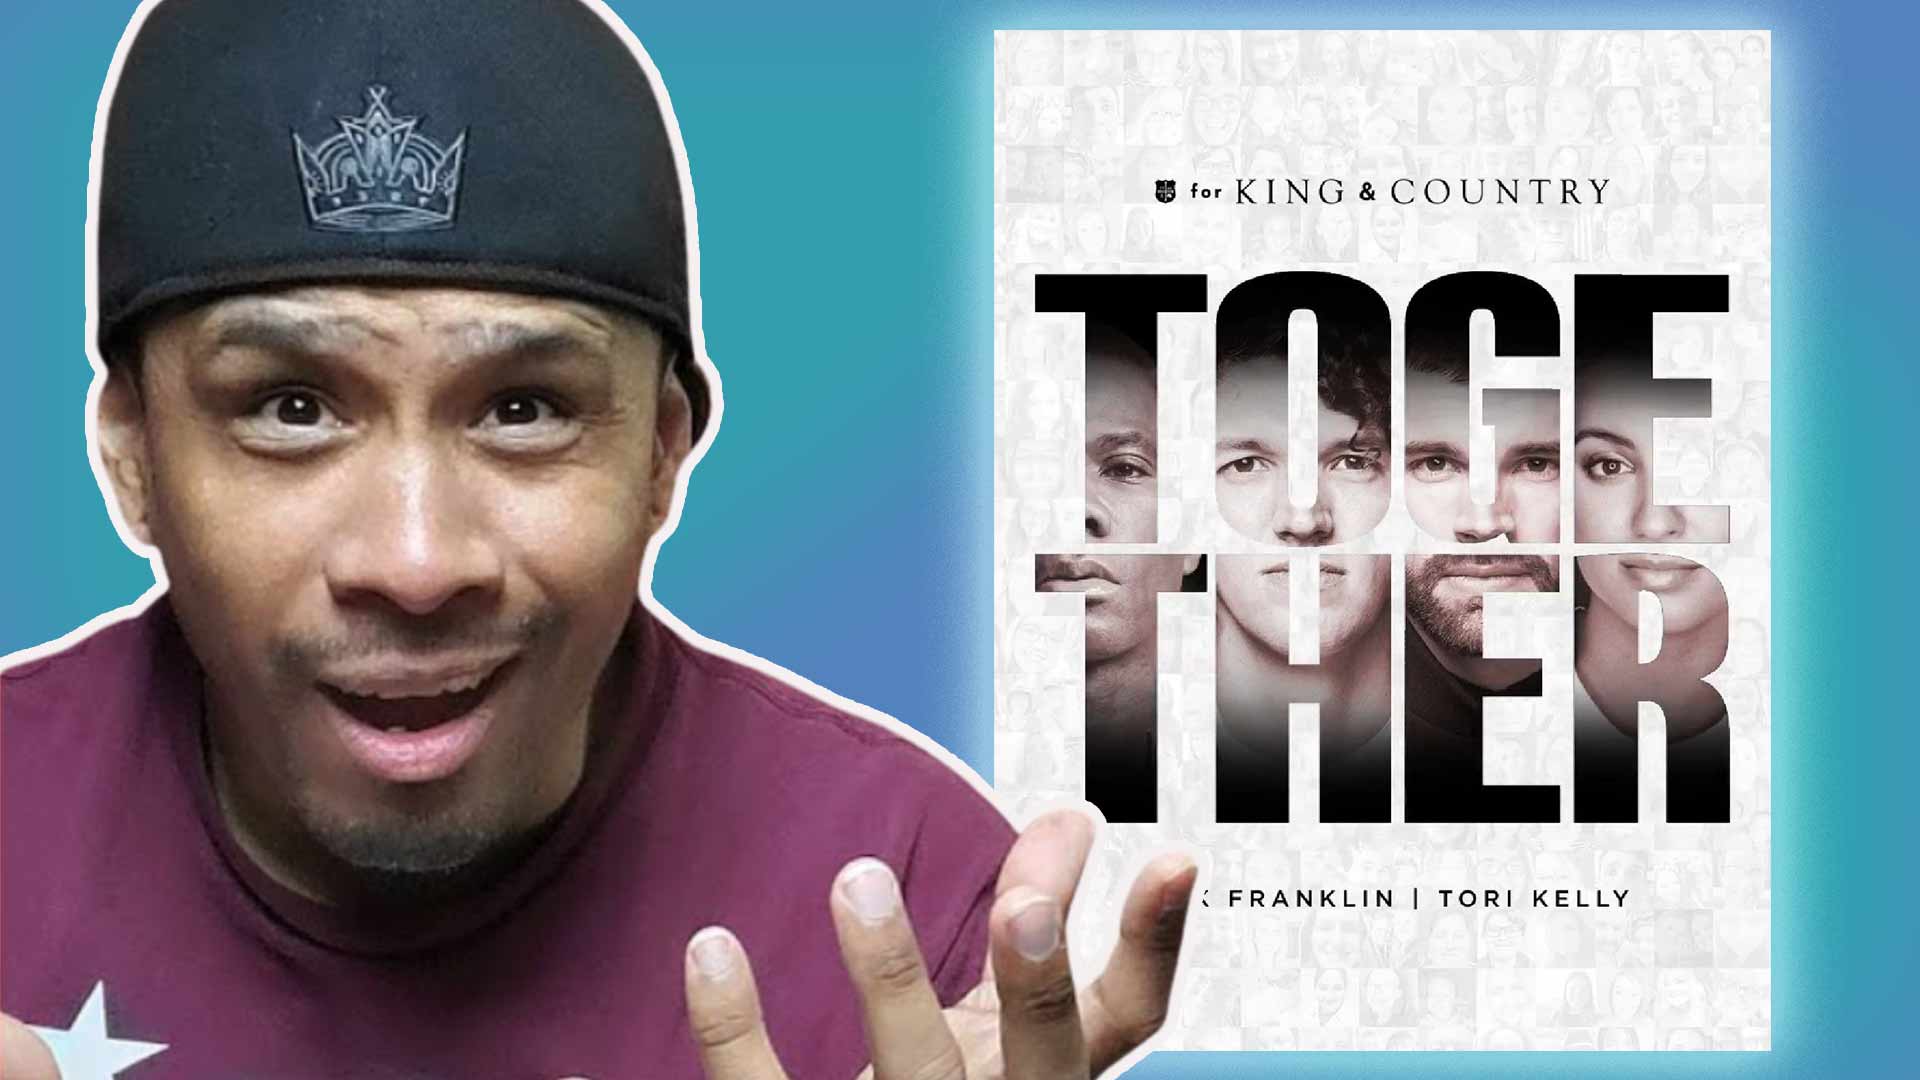 Man Reacts to for KING & COUNTRY's "TOGETHER" with album art in the background